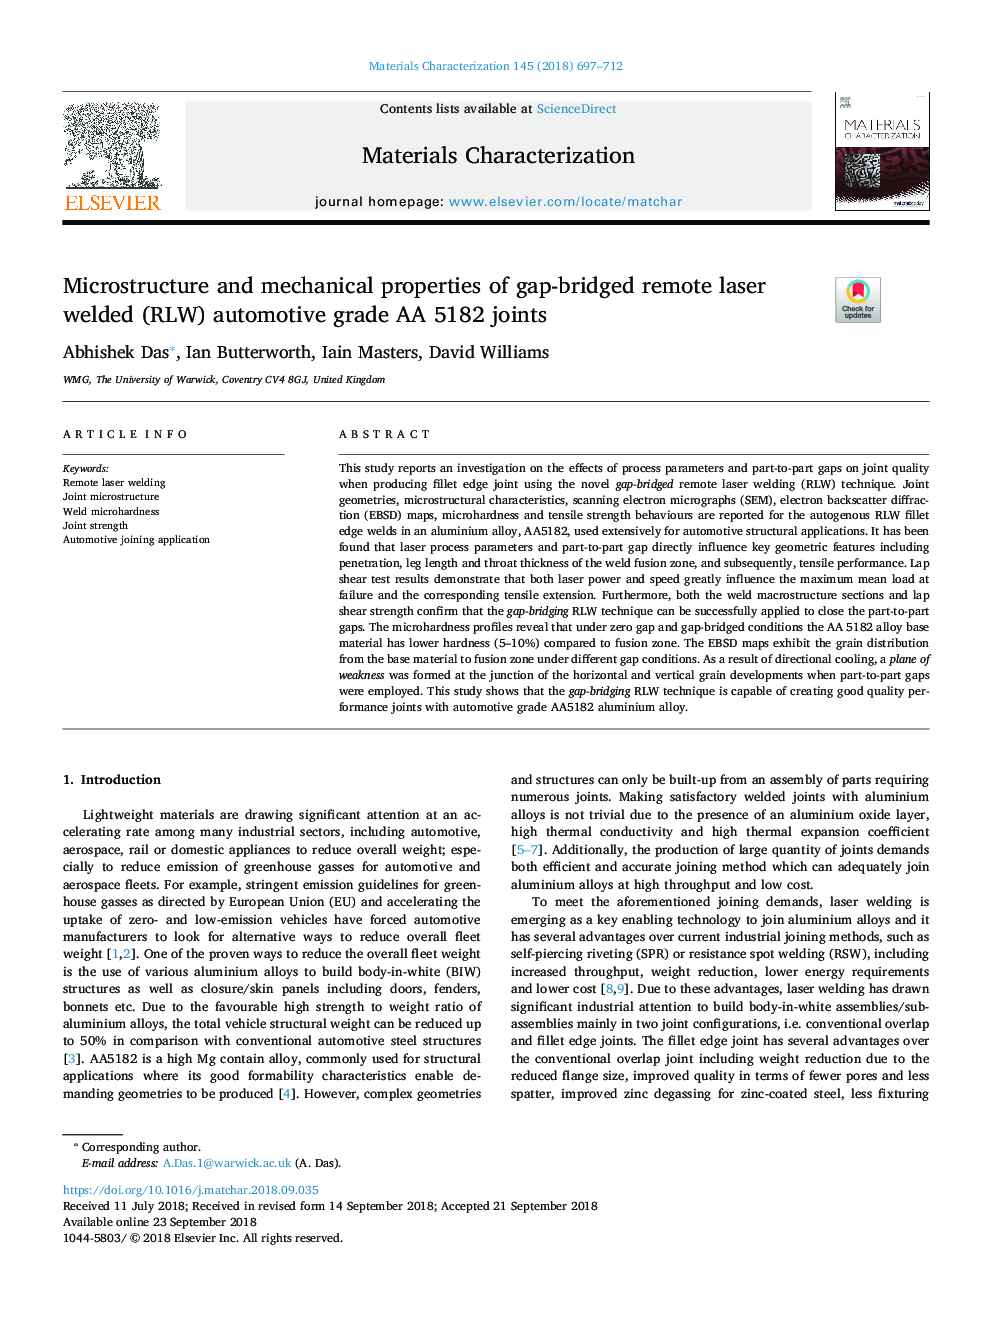 Microstructure and mechanical properties of gap-bridged remote laser welded (RLW) automotive grade AA 5182 joints